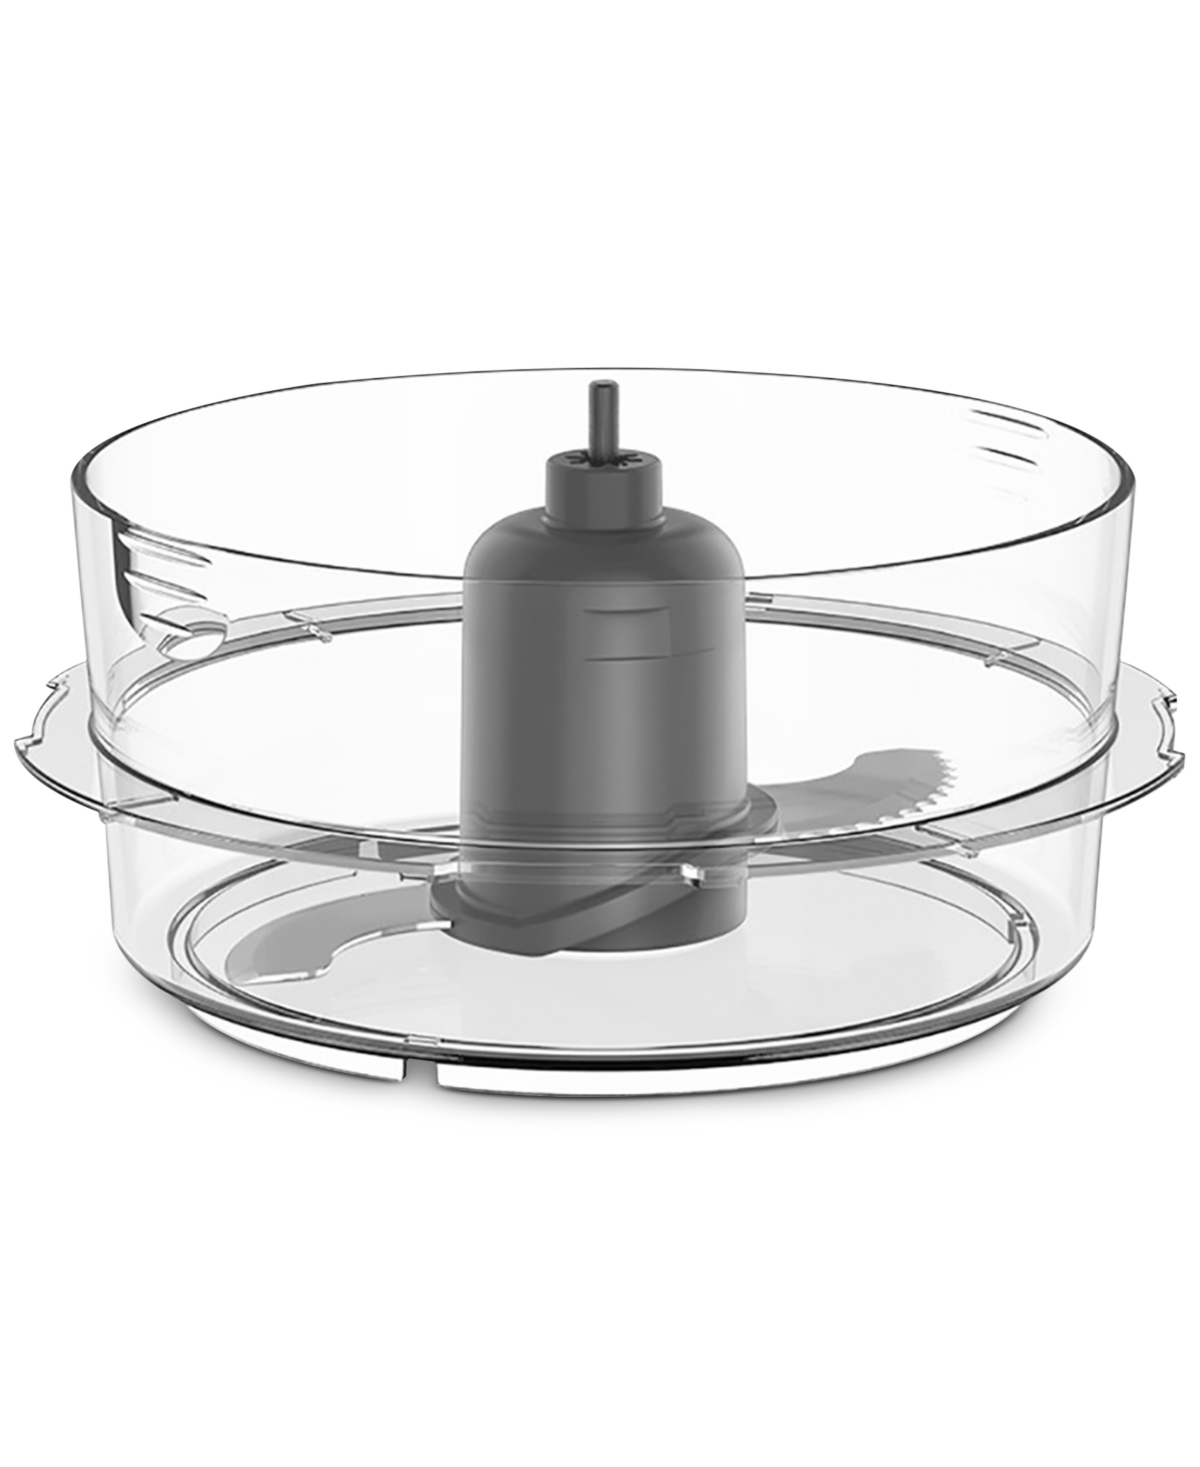 Cuisinart Core Essentials 4-cup Work Bowl In Clear,gray